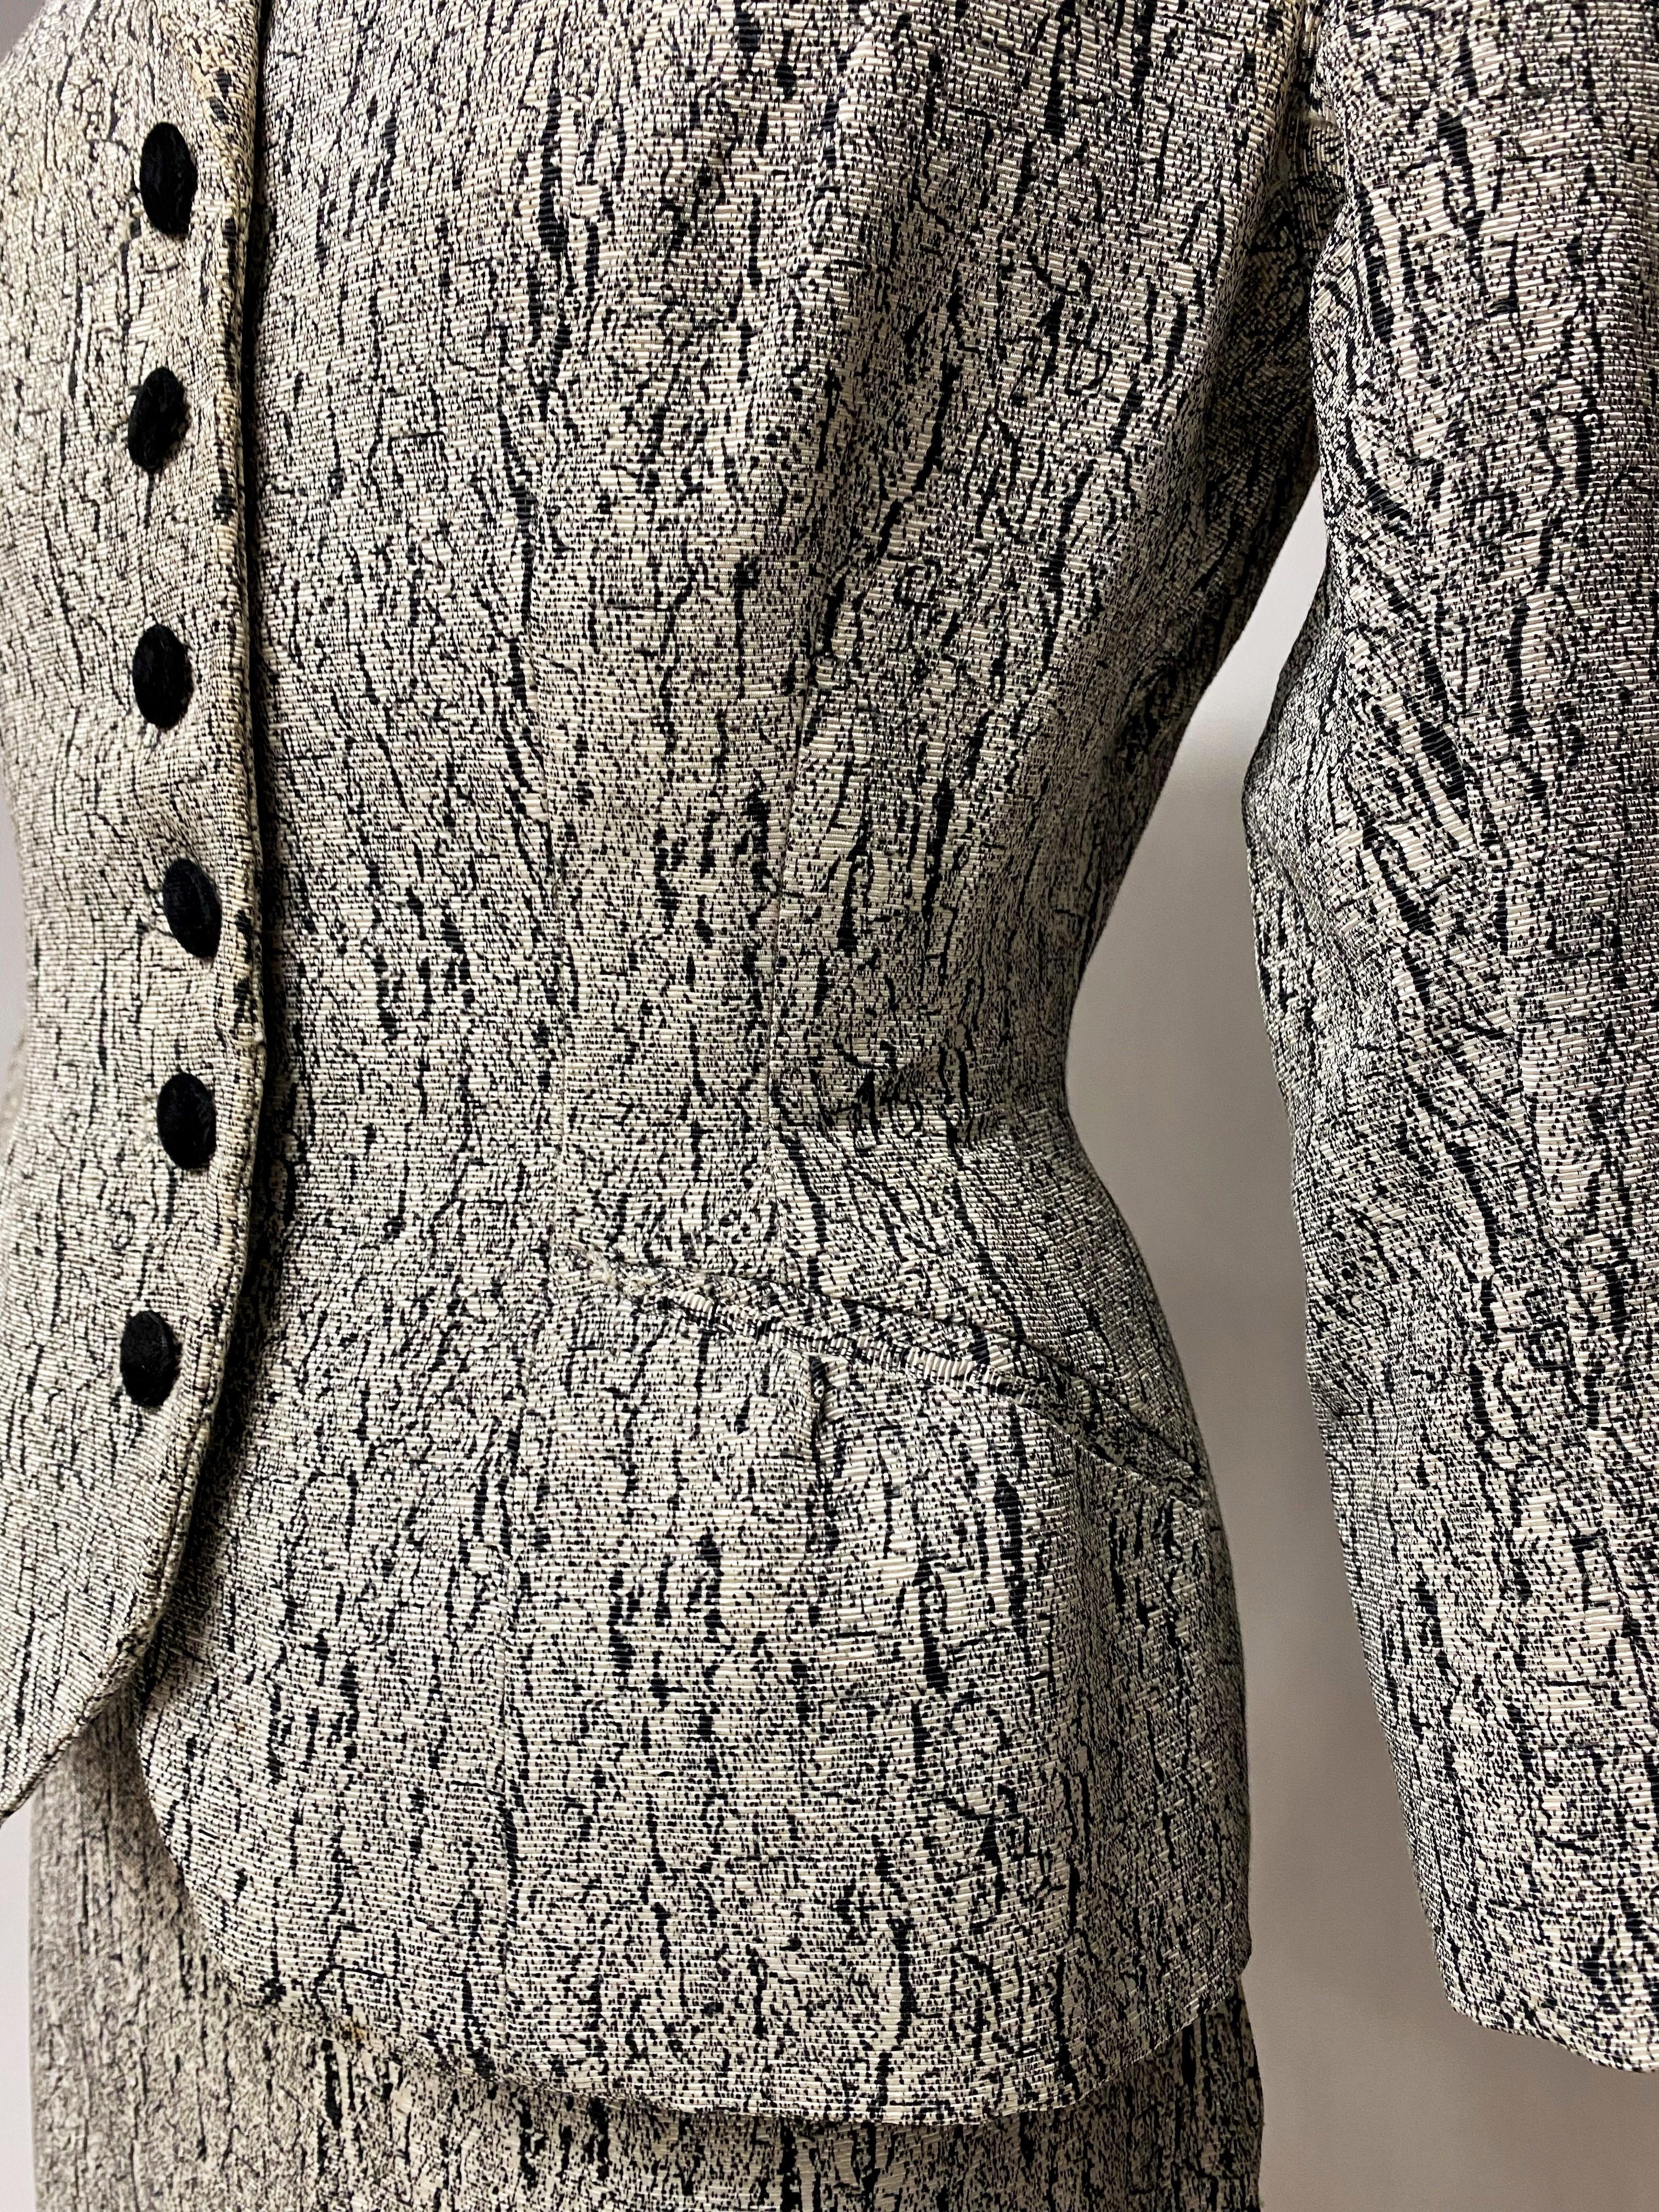 Circa 1947-1950

France

Unlabelled Bar Haute Couture skirt suit in black and white mottled marbled printed silk faille dating from the New-Look years of Christian Dior. Jacket with three-quarter length sleeves, fitted with a rigid shape on the hips